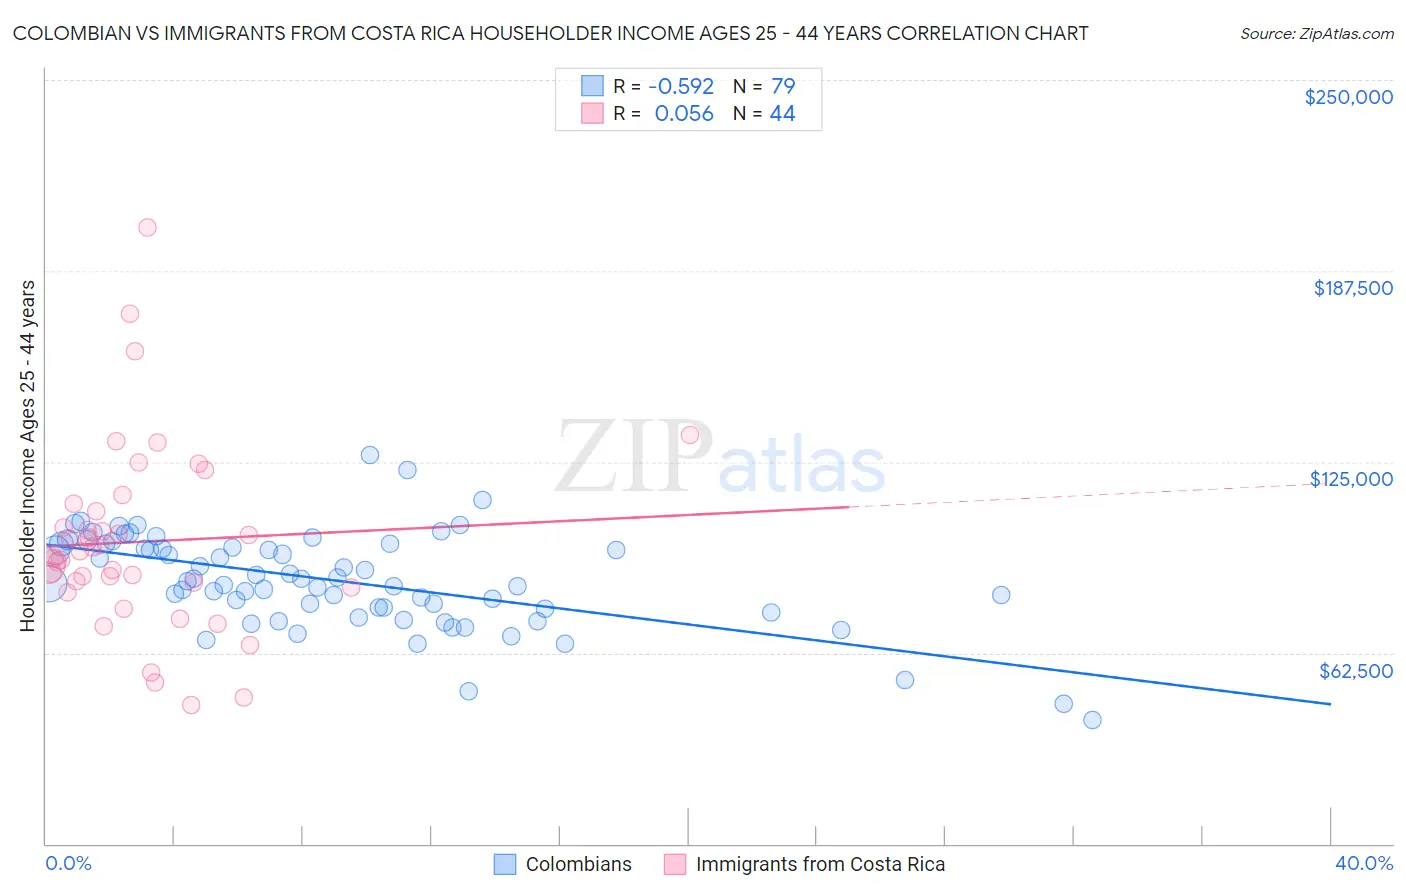 Colombian vs Immigrants from Costa Rica Householder Income Ages 25 - 44 years